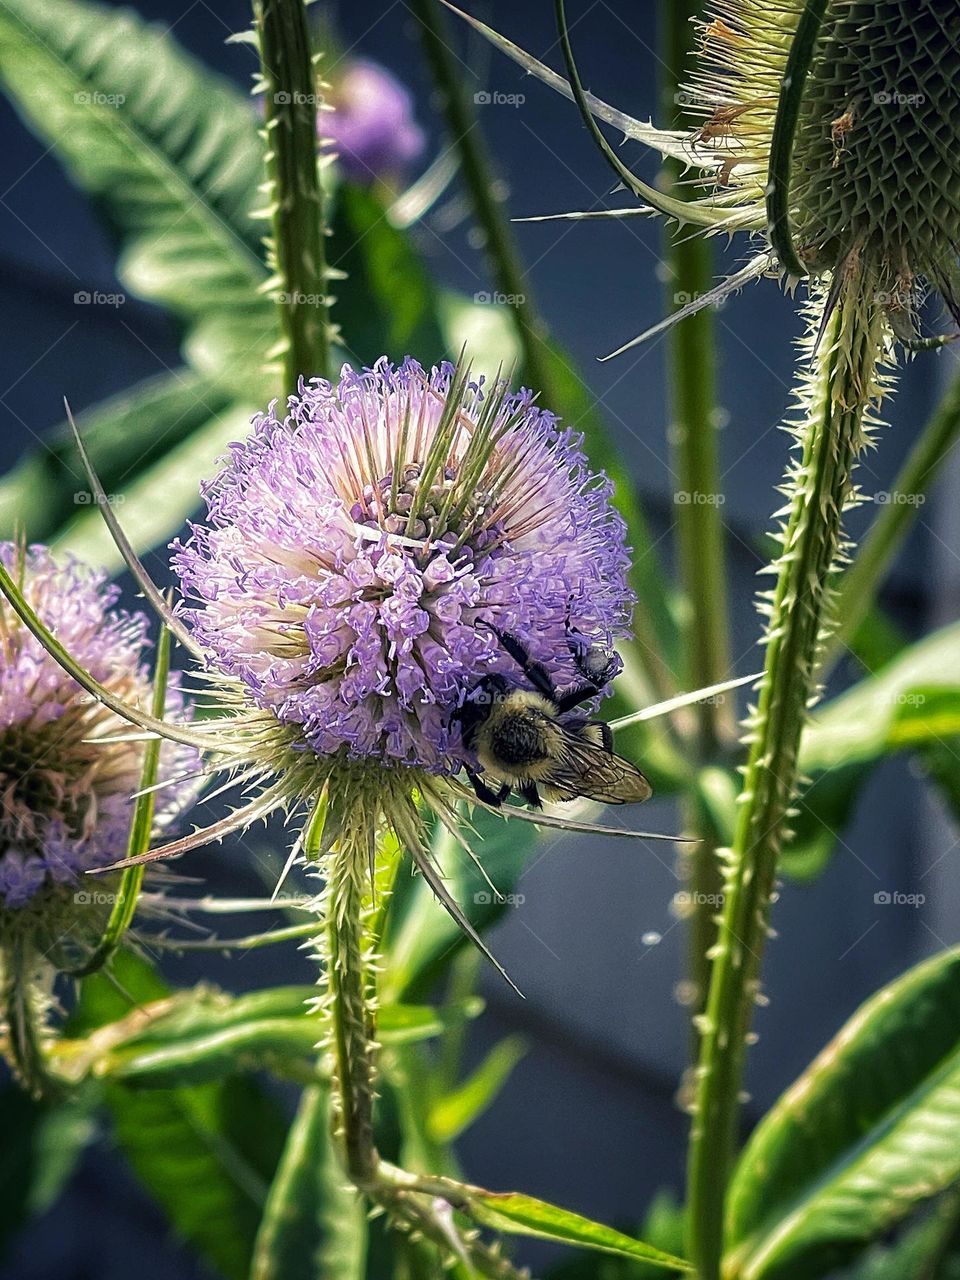 Bees pollinating on my Teasel 